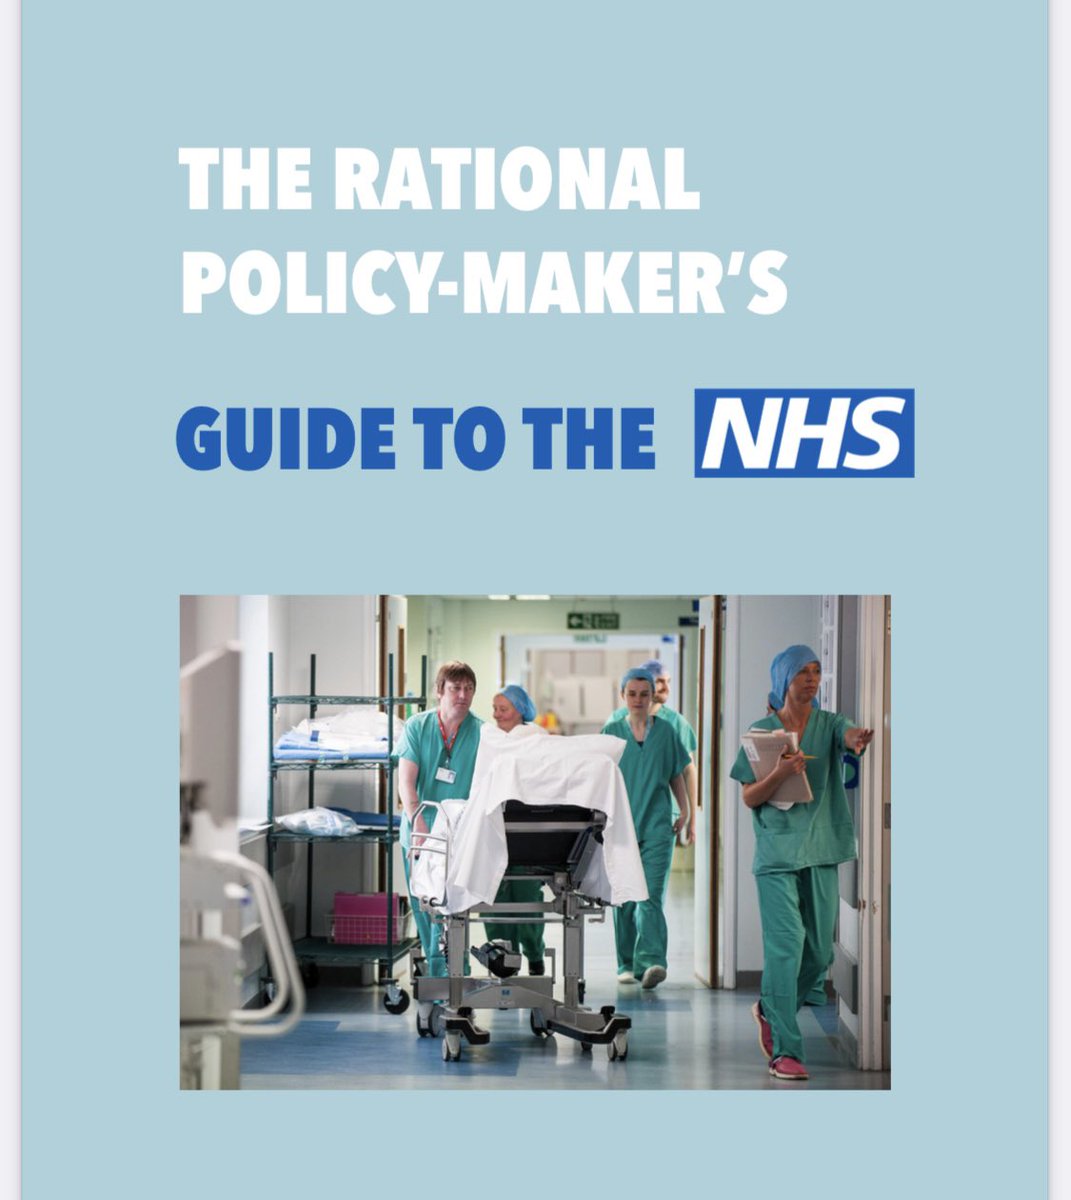 @bbcnickrobinson @BBCr4today thank you for challenging the health minister on spending today. Have you seen @99Organisation Rational Policy Maker’s Guide to the NHS? @MrMarkEThomas would be happy to talk to you about it? 99-percent.org/wp-content/upl…